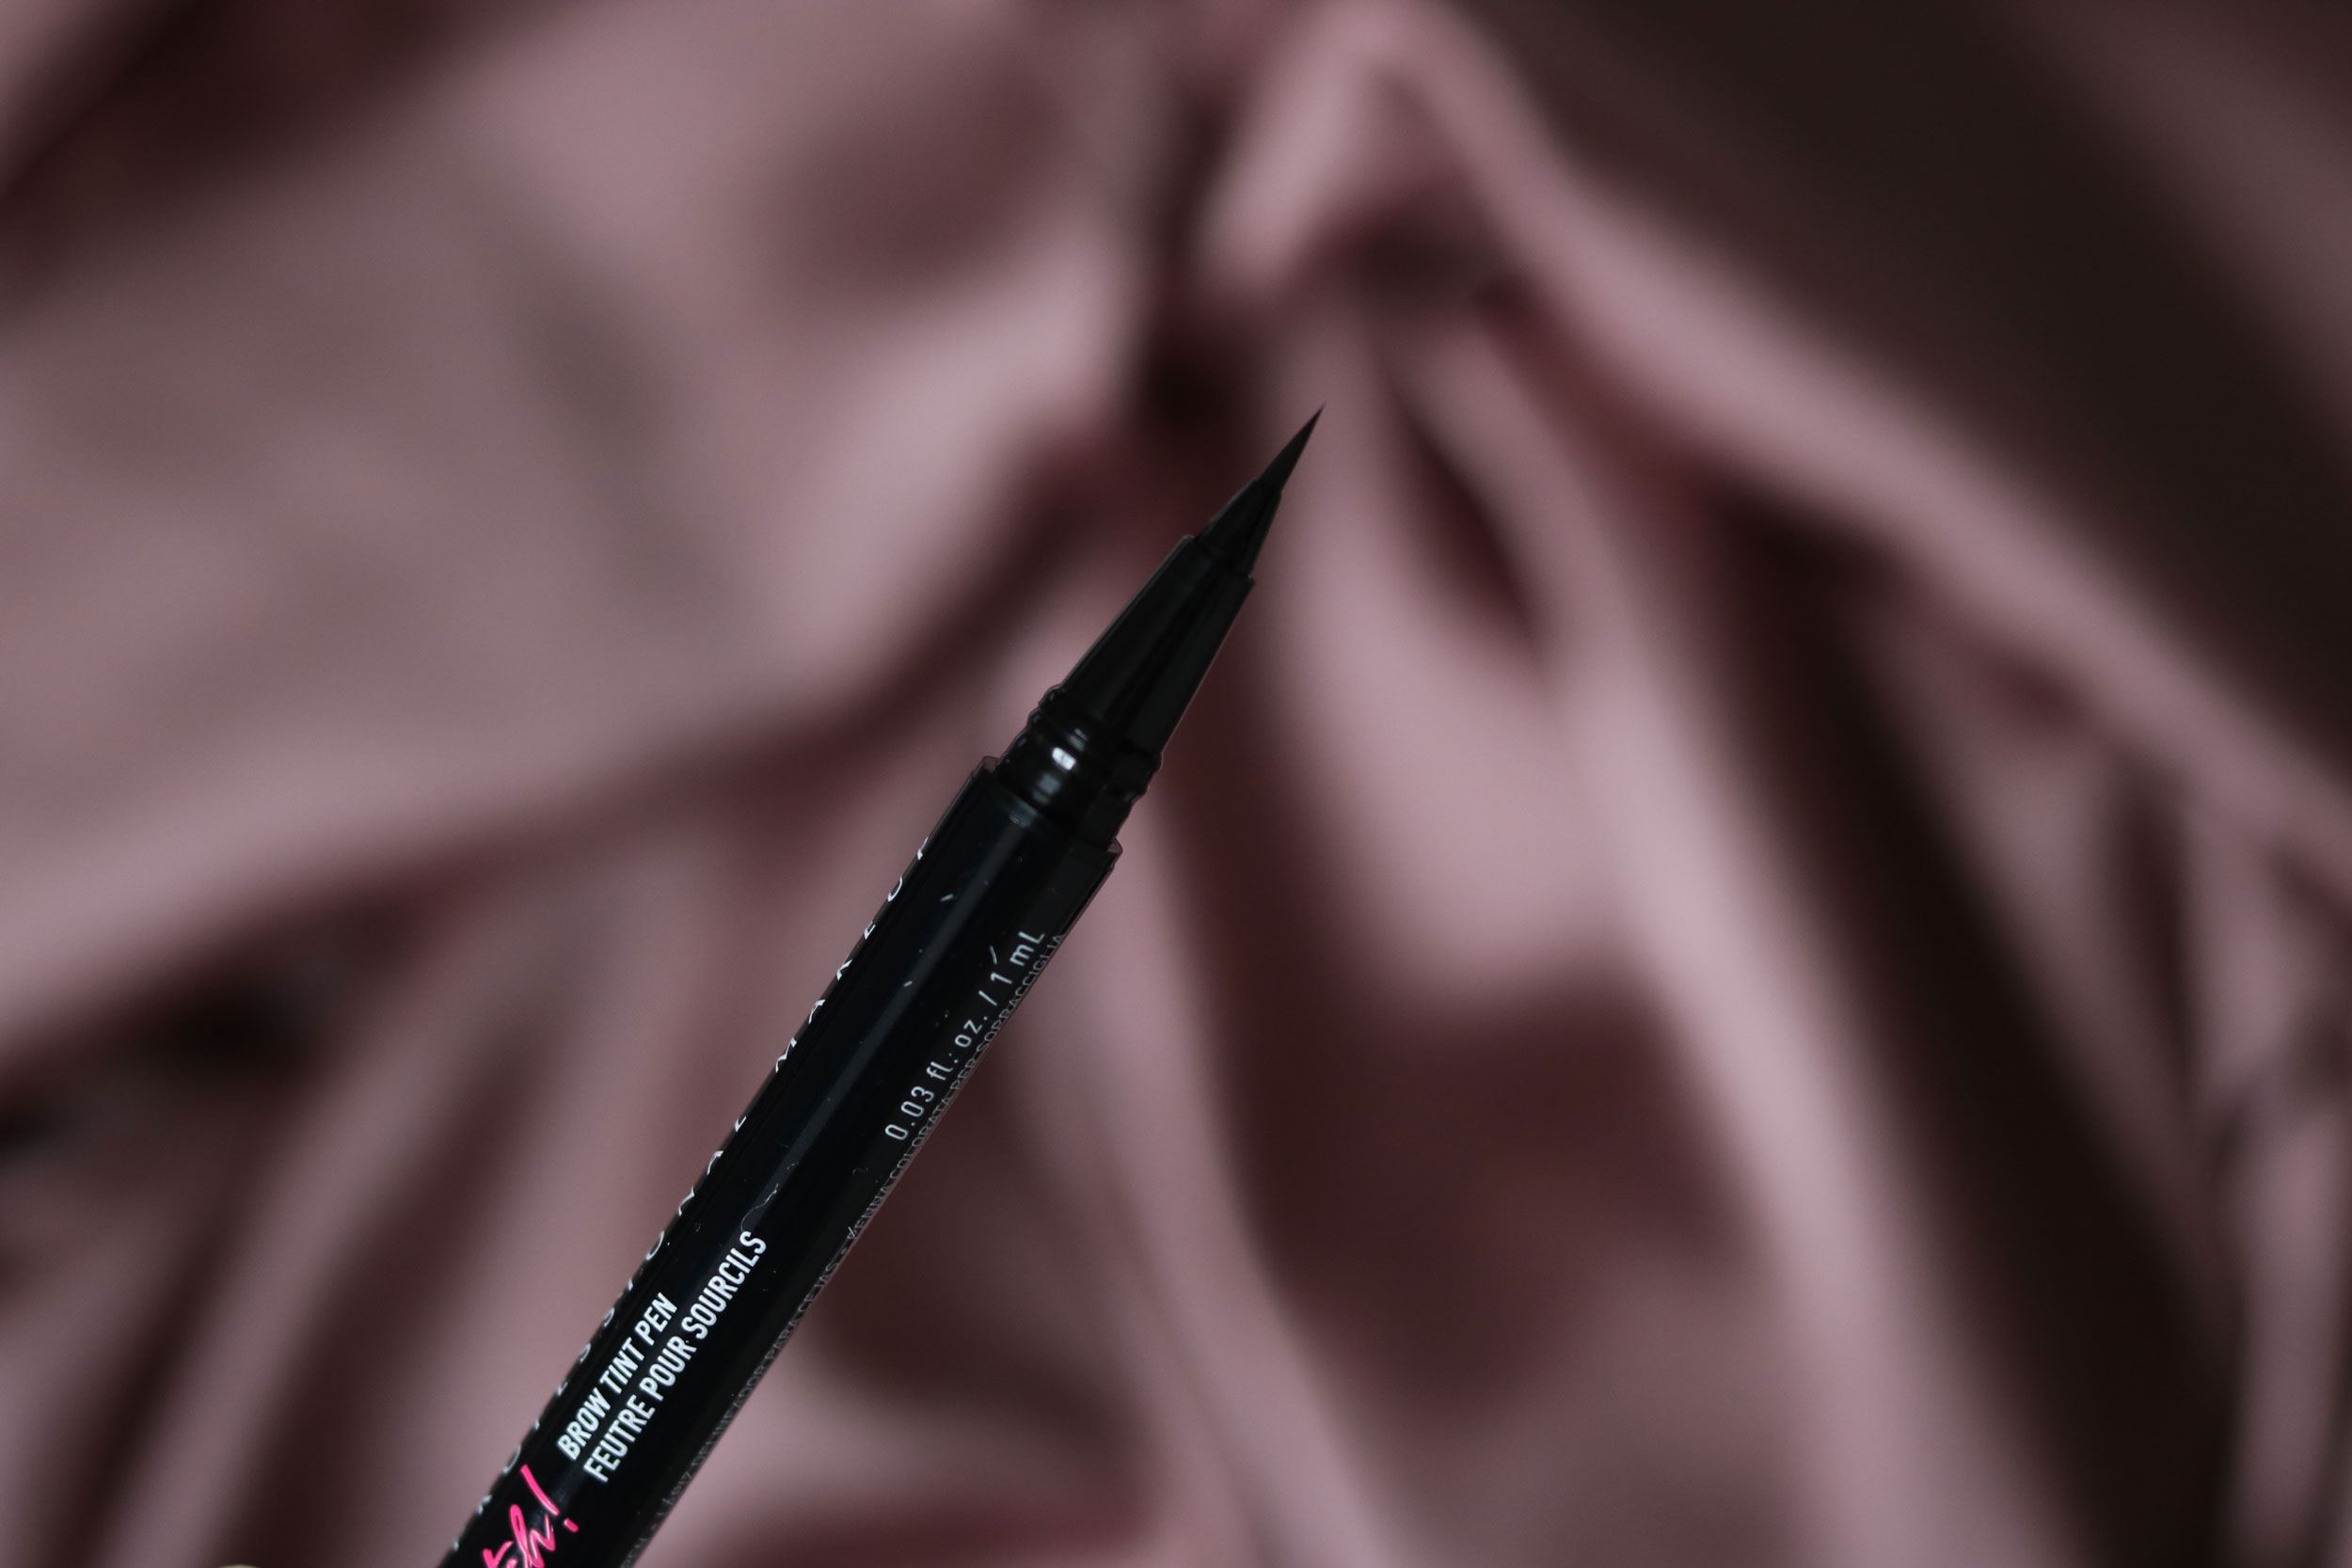 Review NYX Lift & Snatch! Brow Tint Pen